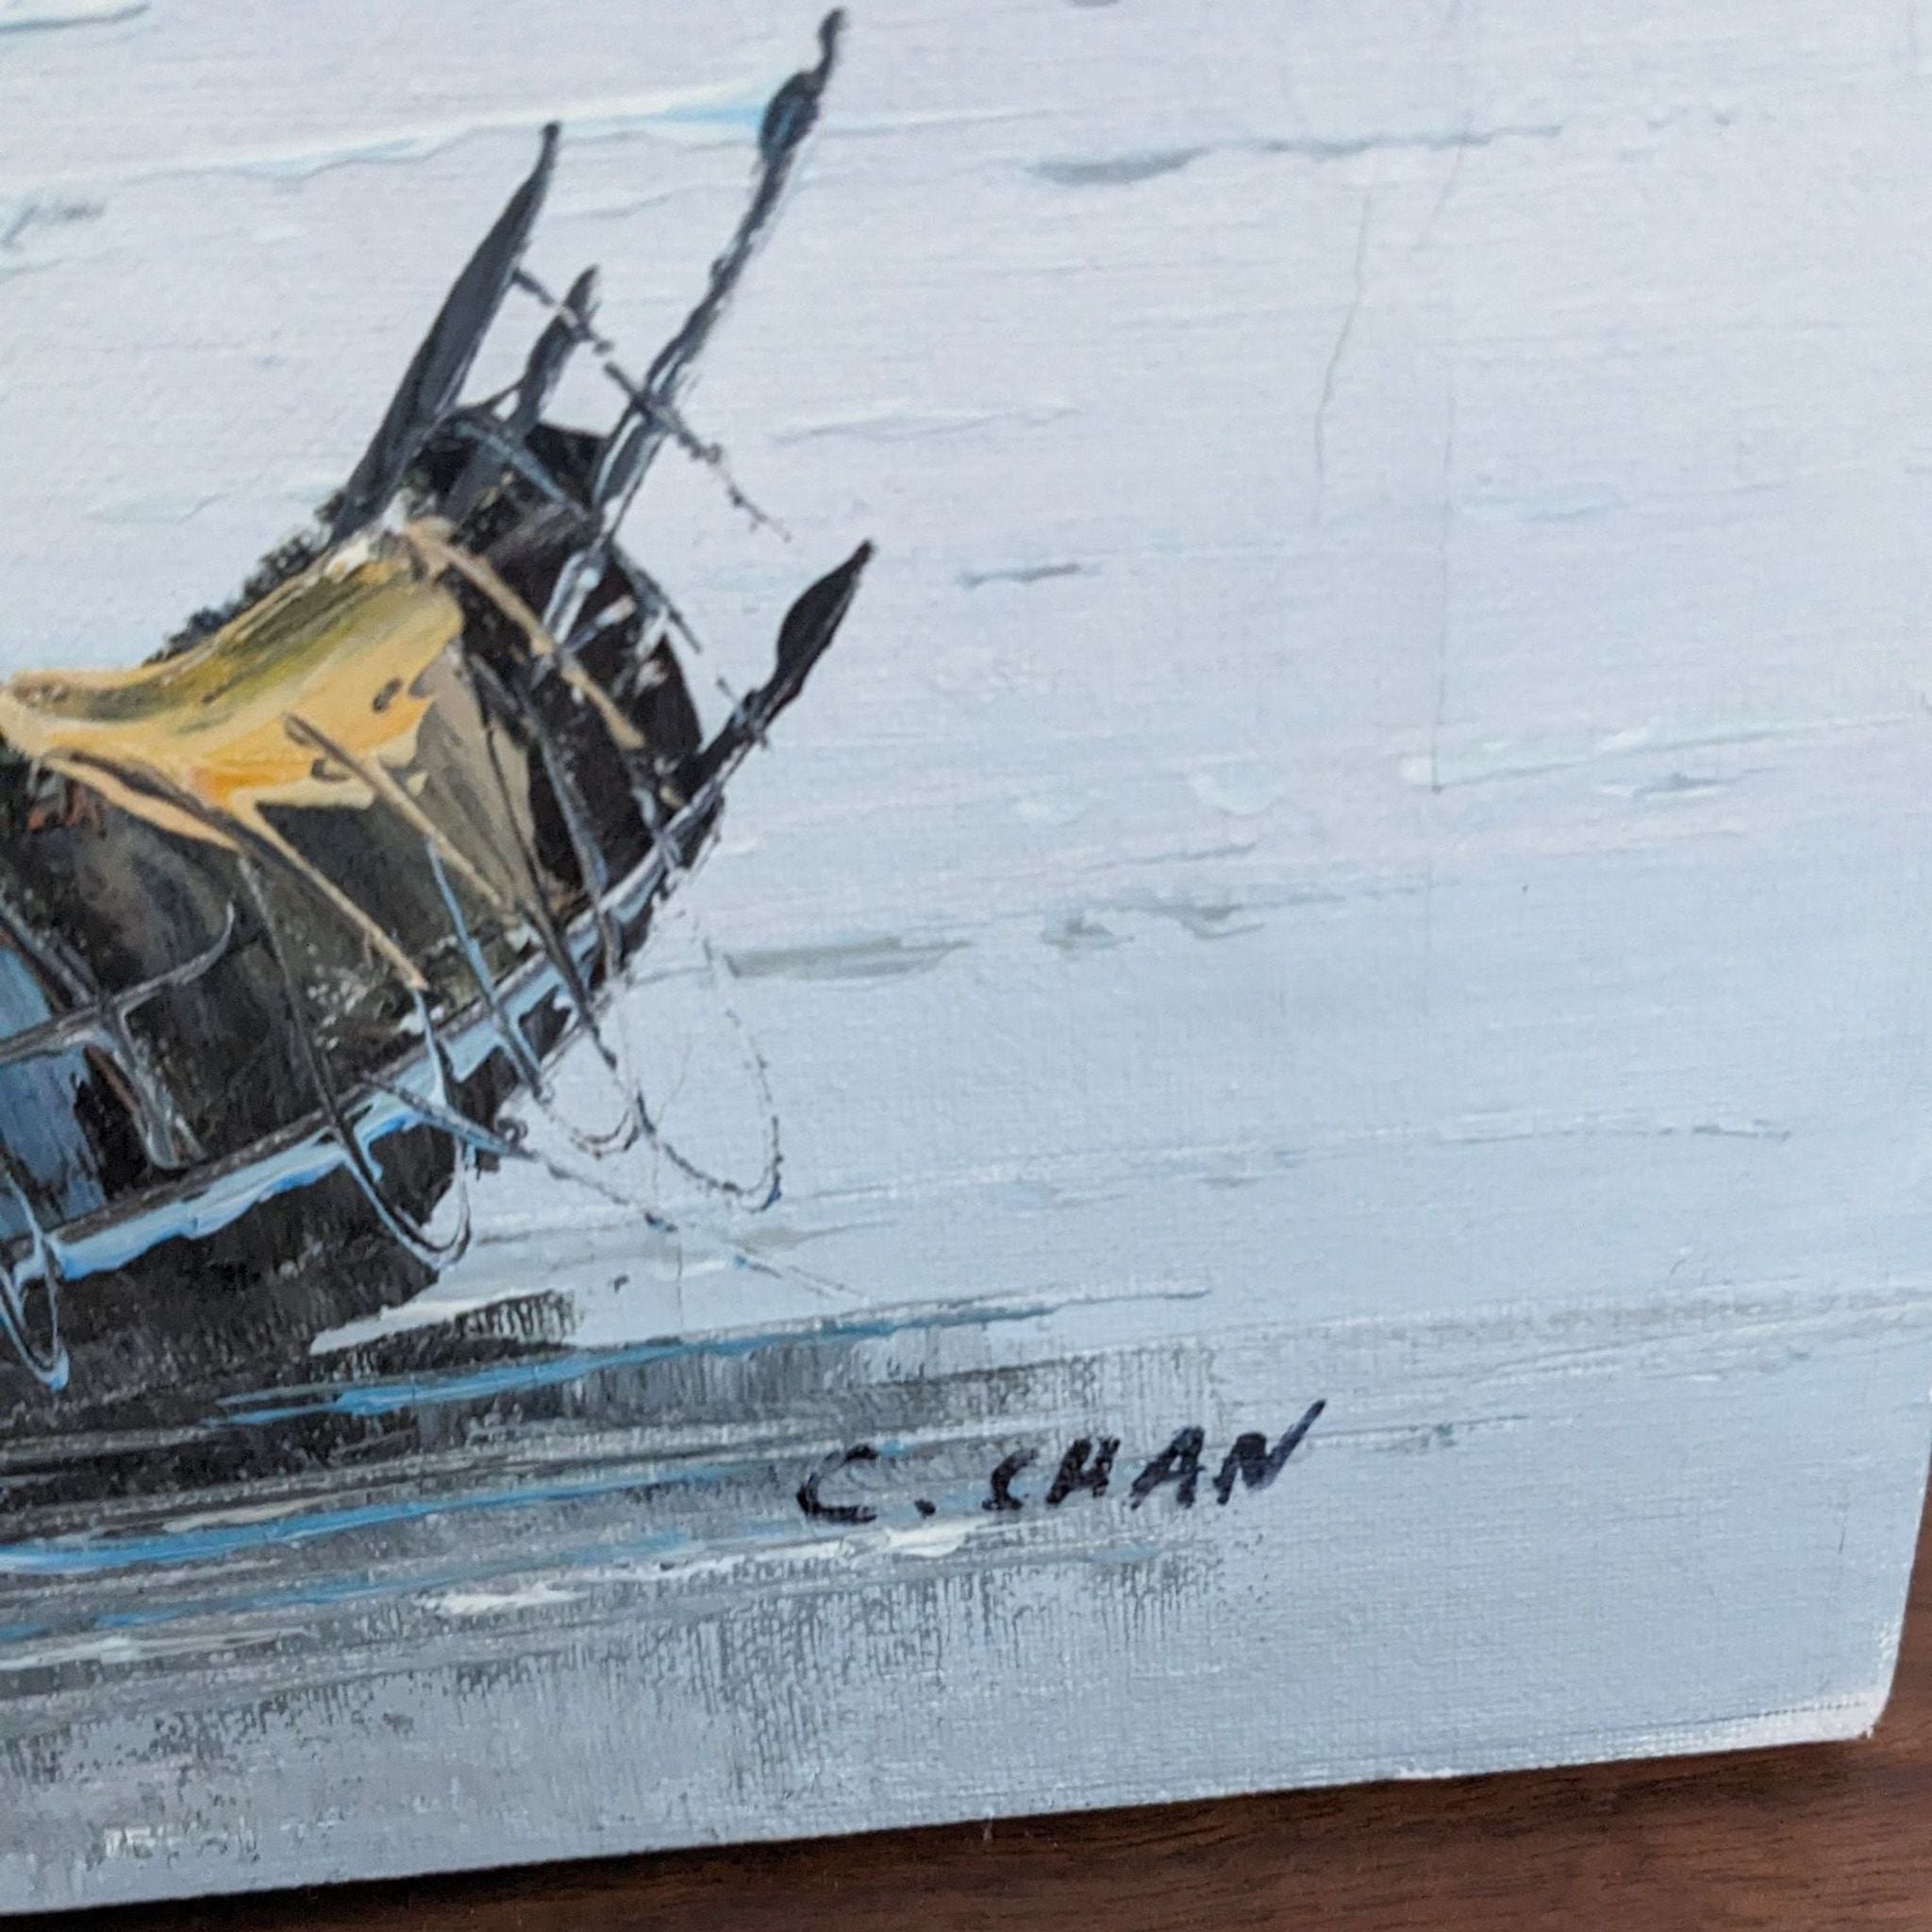 Painting close-up showing a sailboat with artist's signature 'C. Chan', by Reperch, against a pale backdrop.